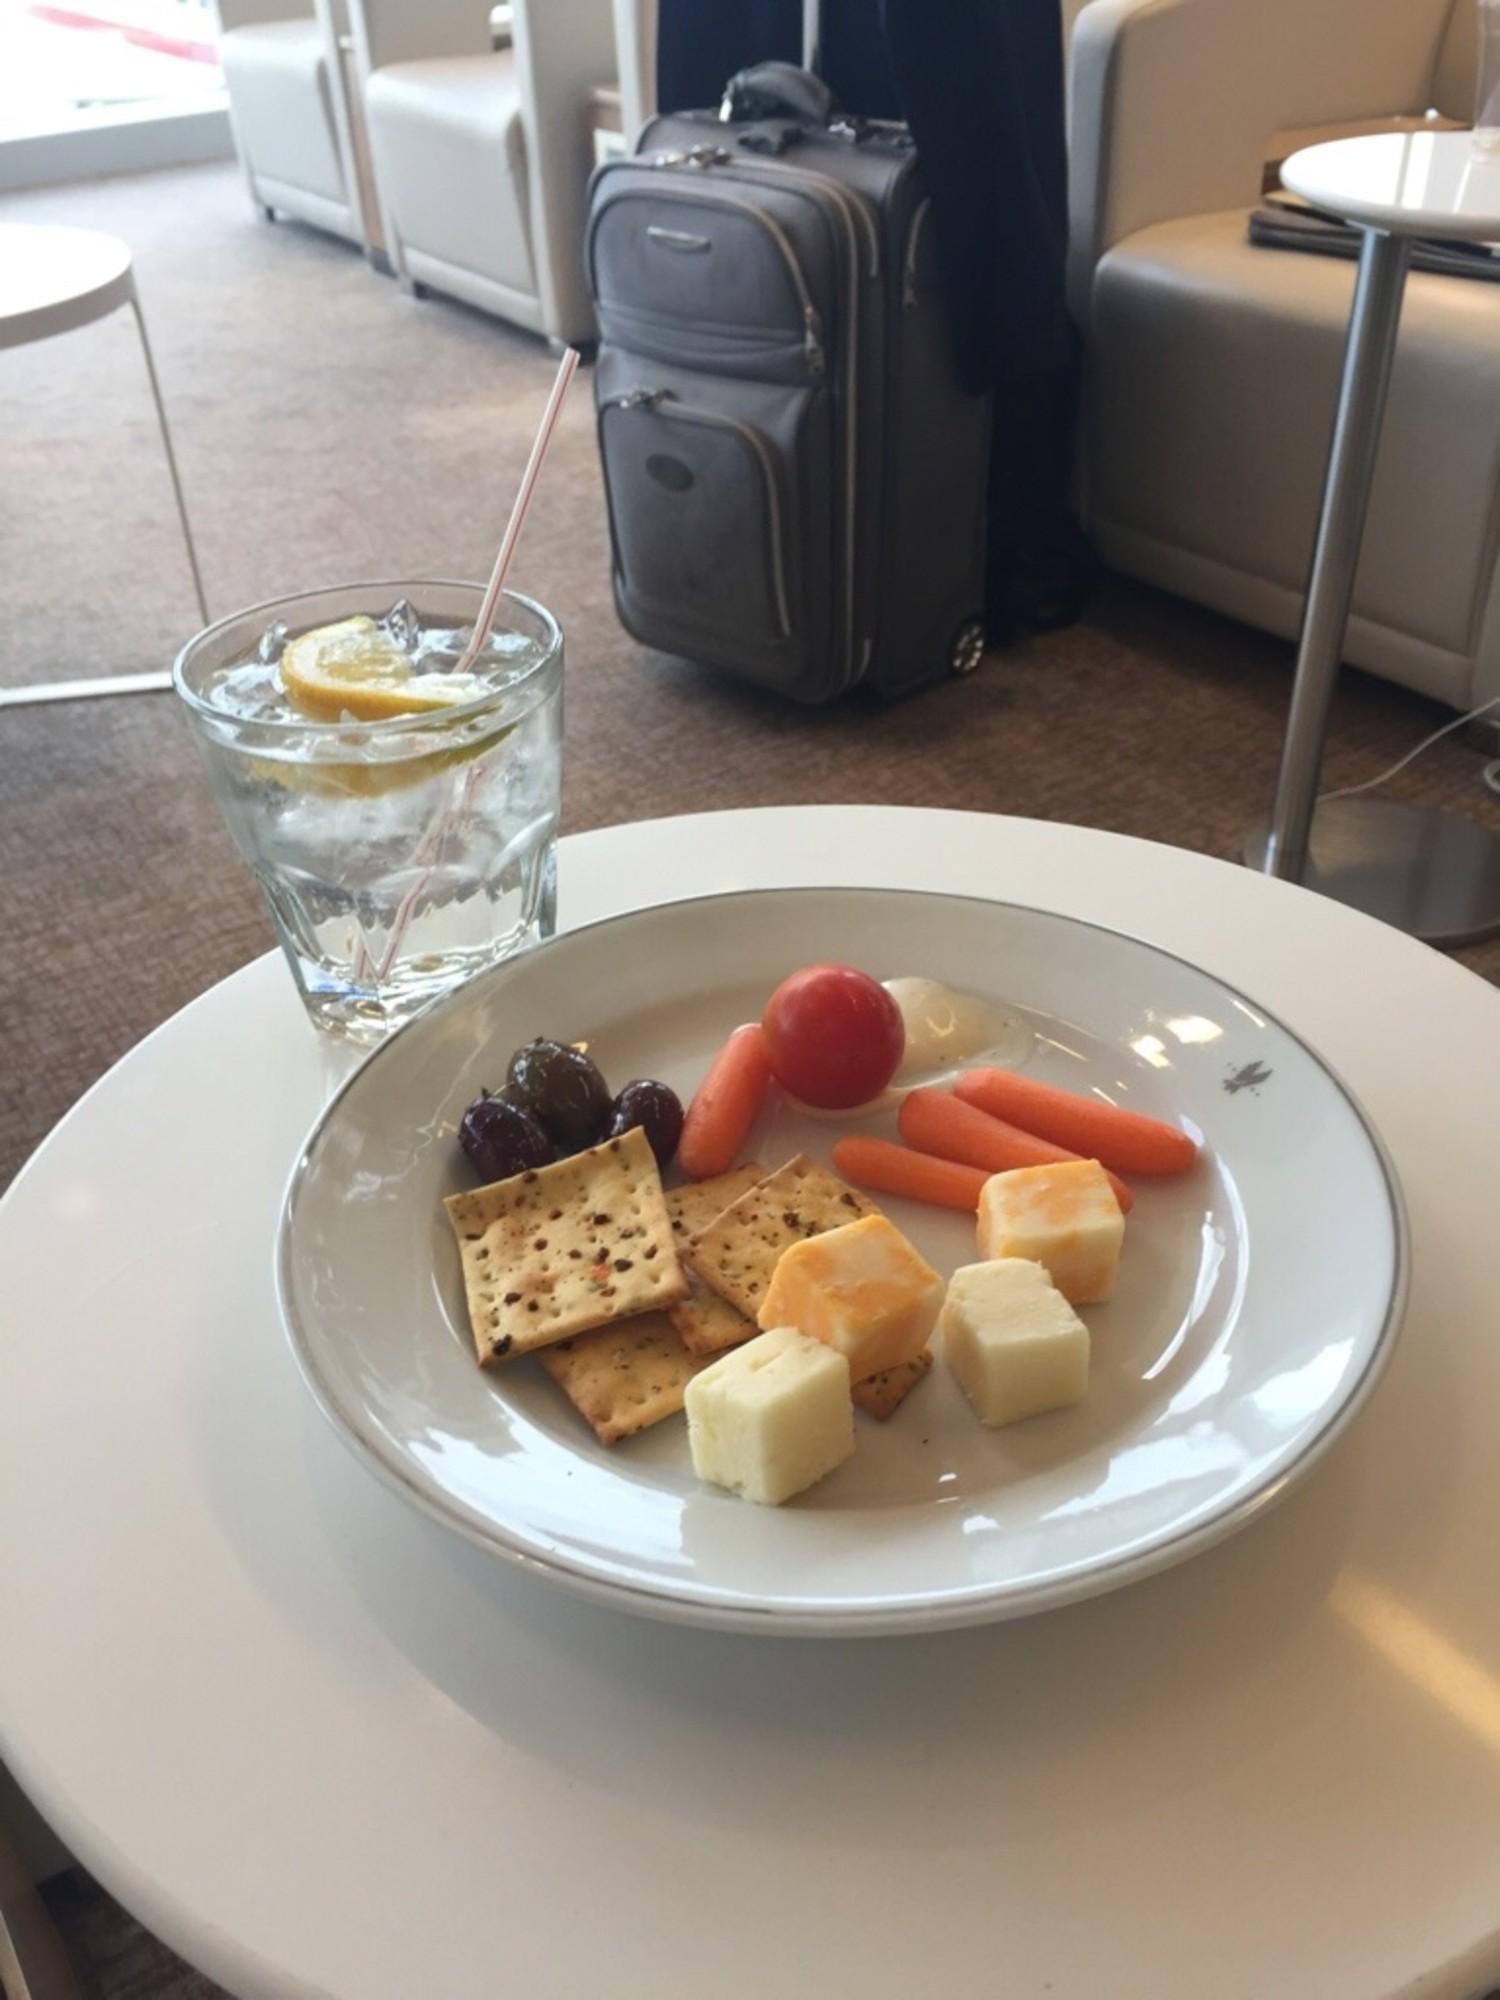 American Airlines Admirals Club image 19 of 50